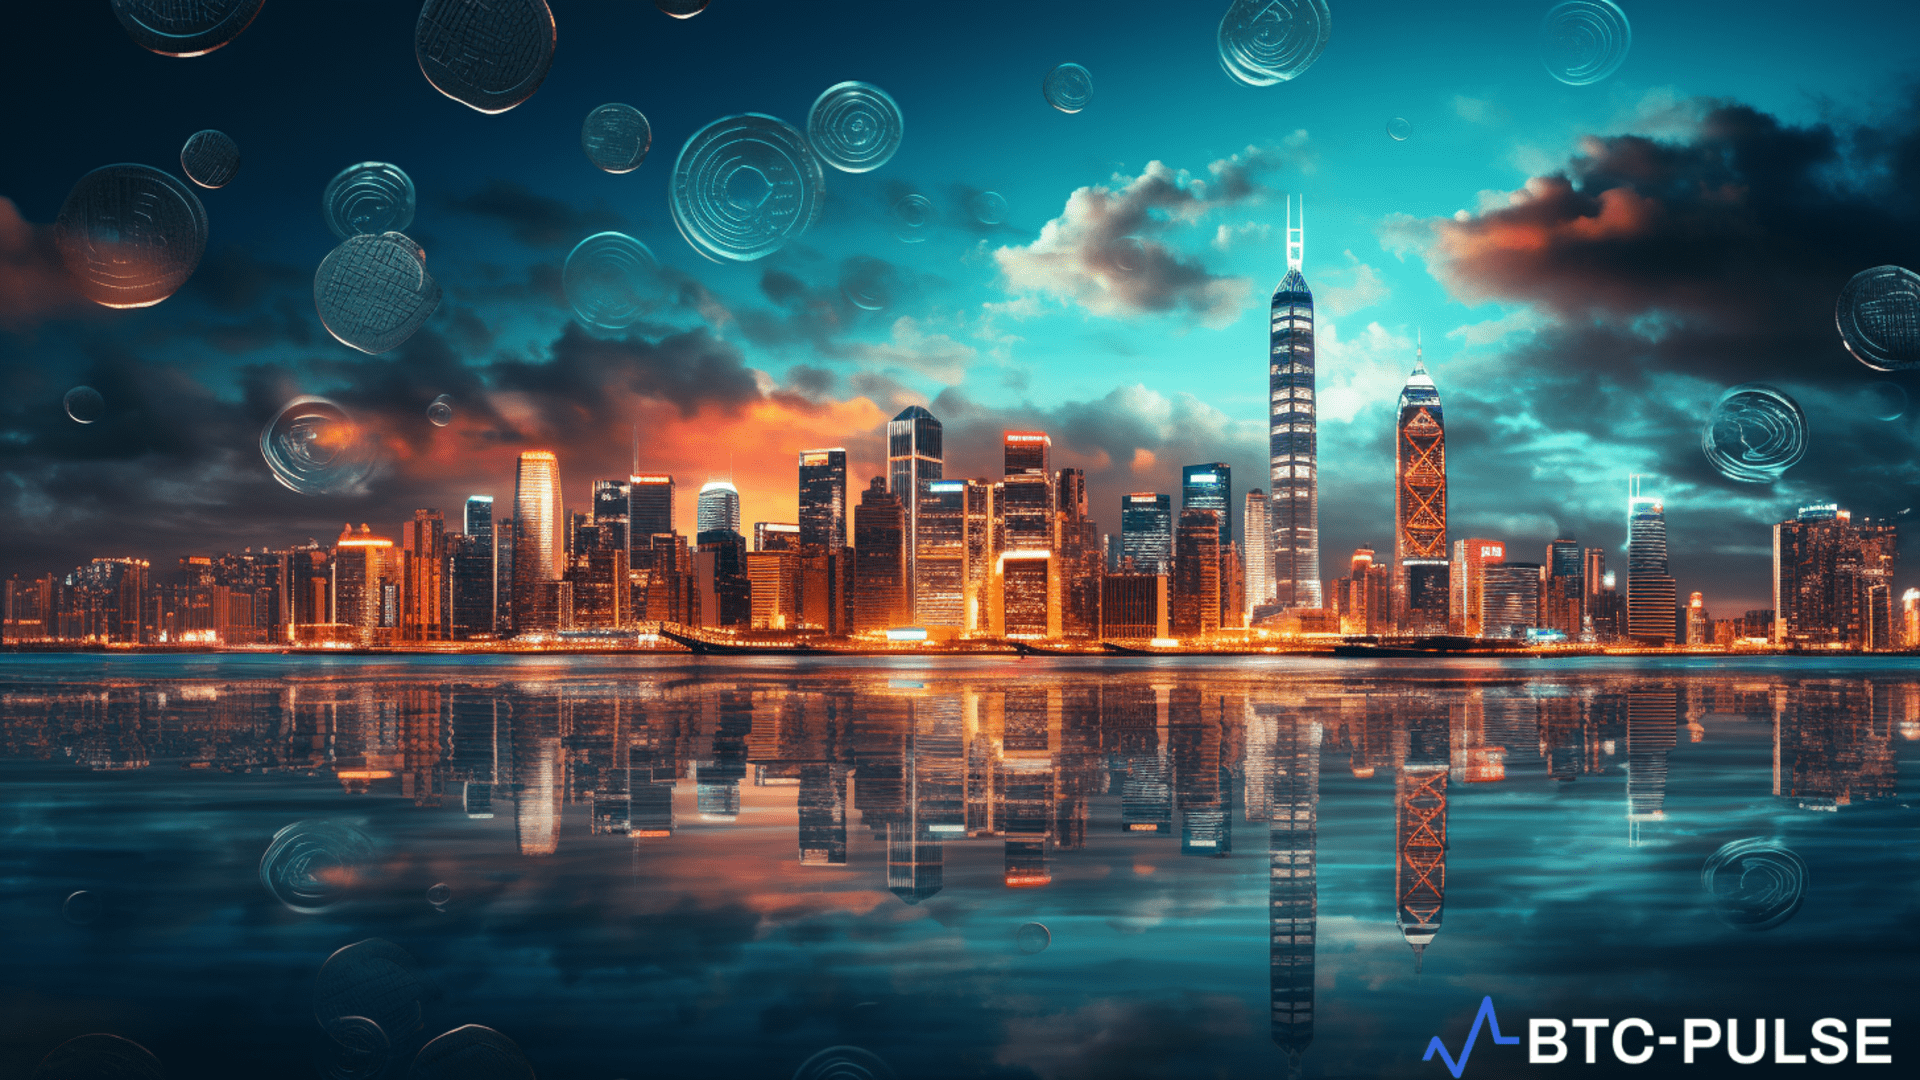 A view of Hong Kong's skyline with digital cryptocurrency icons overlay.